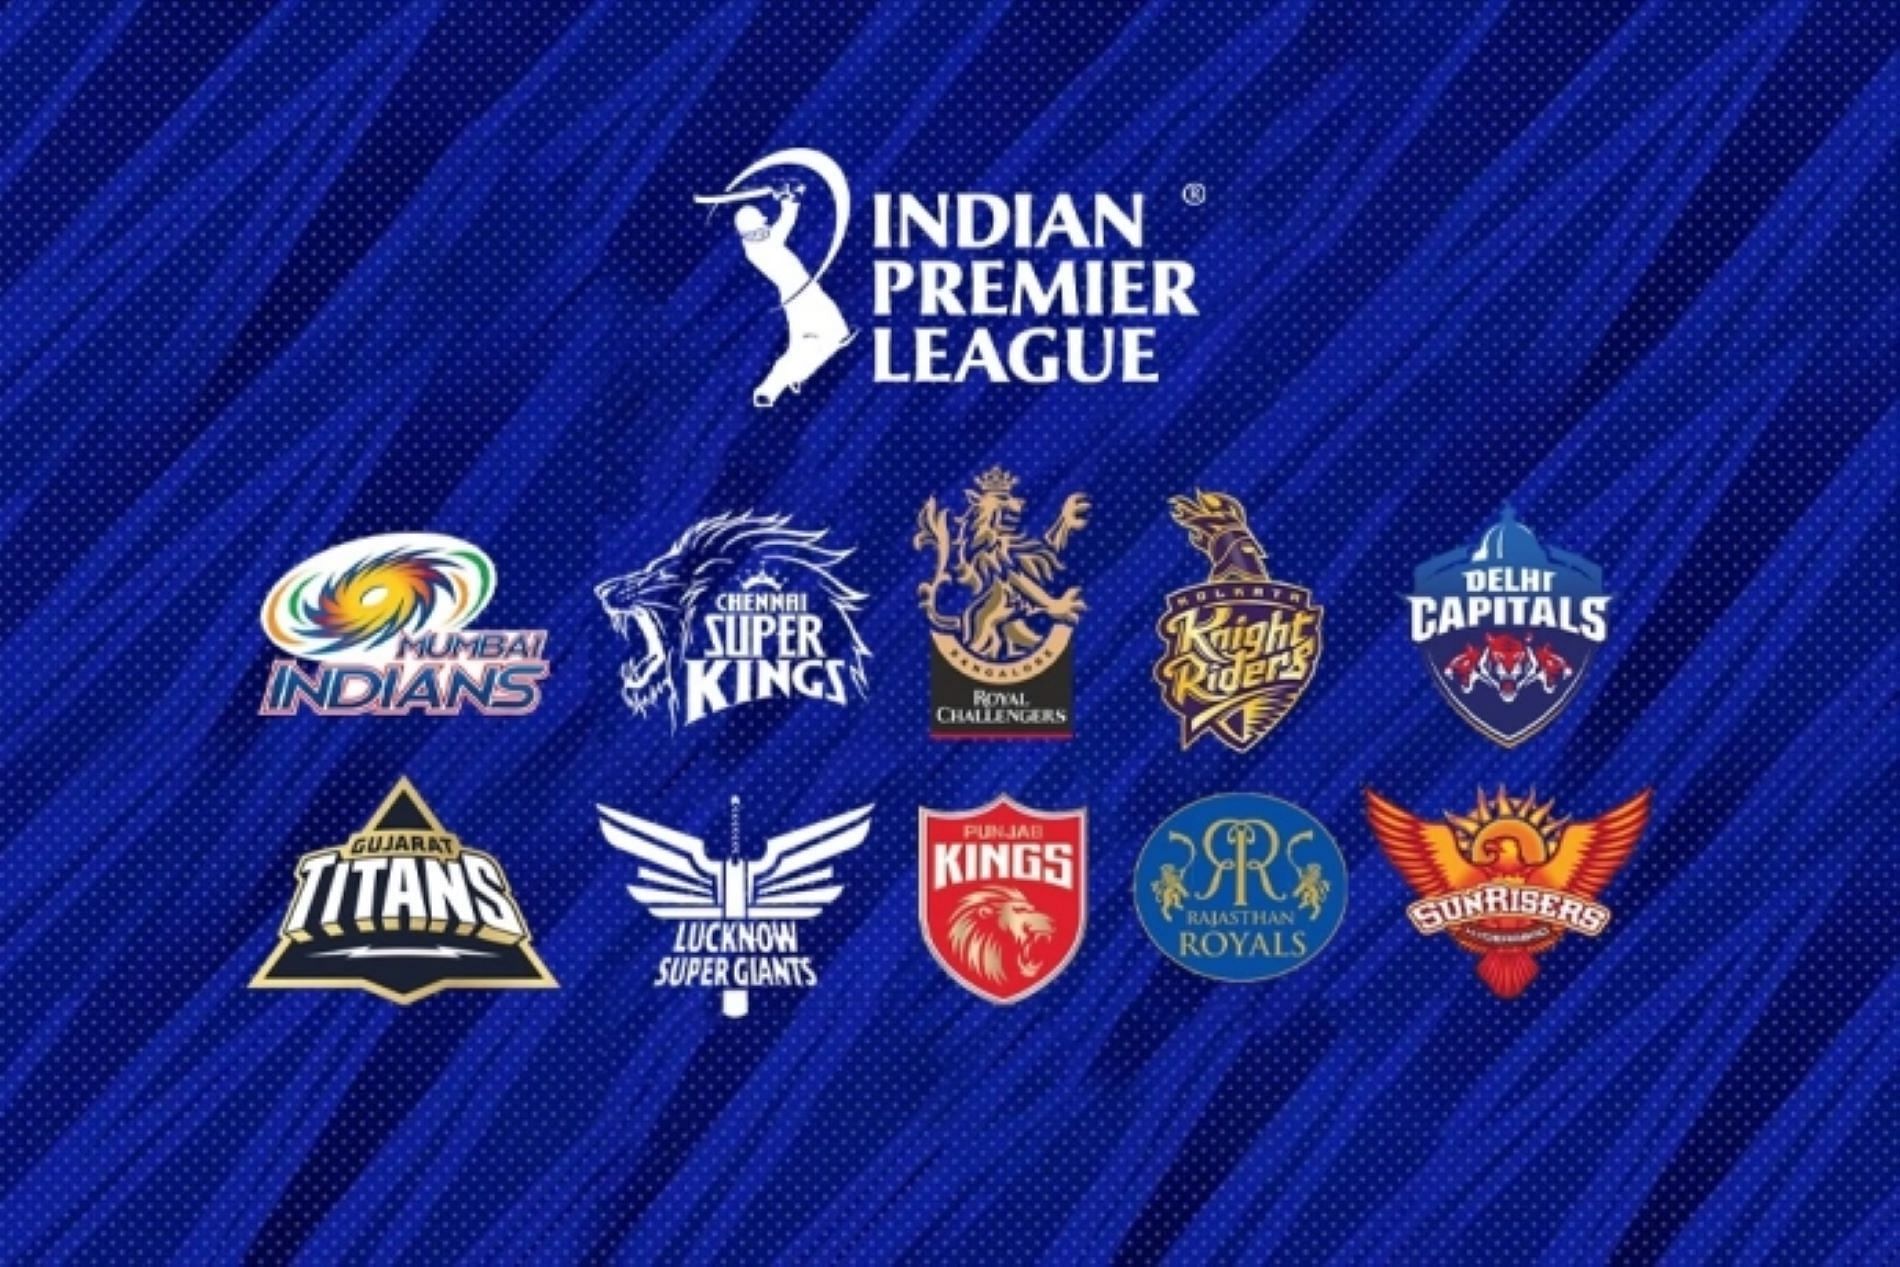 All 10 IPL teams have huge following on Twitter